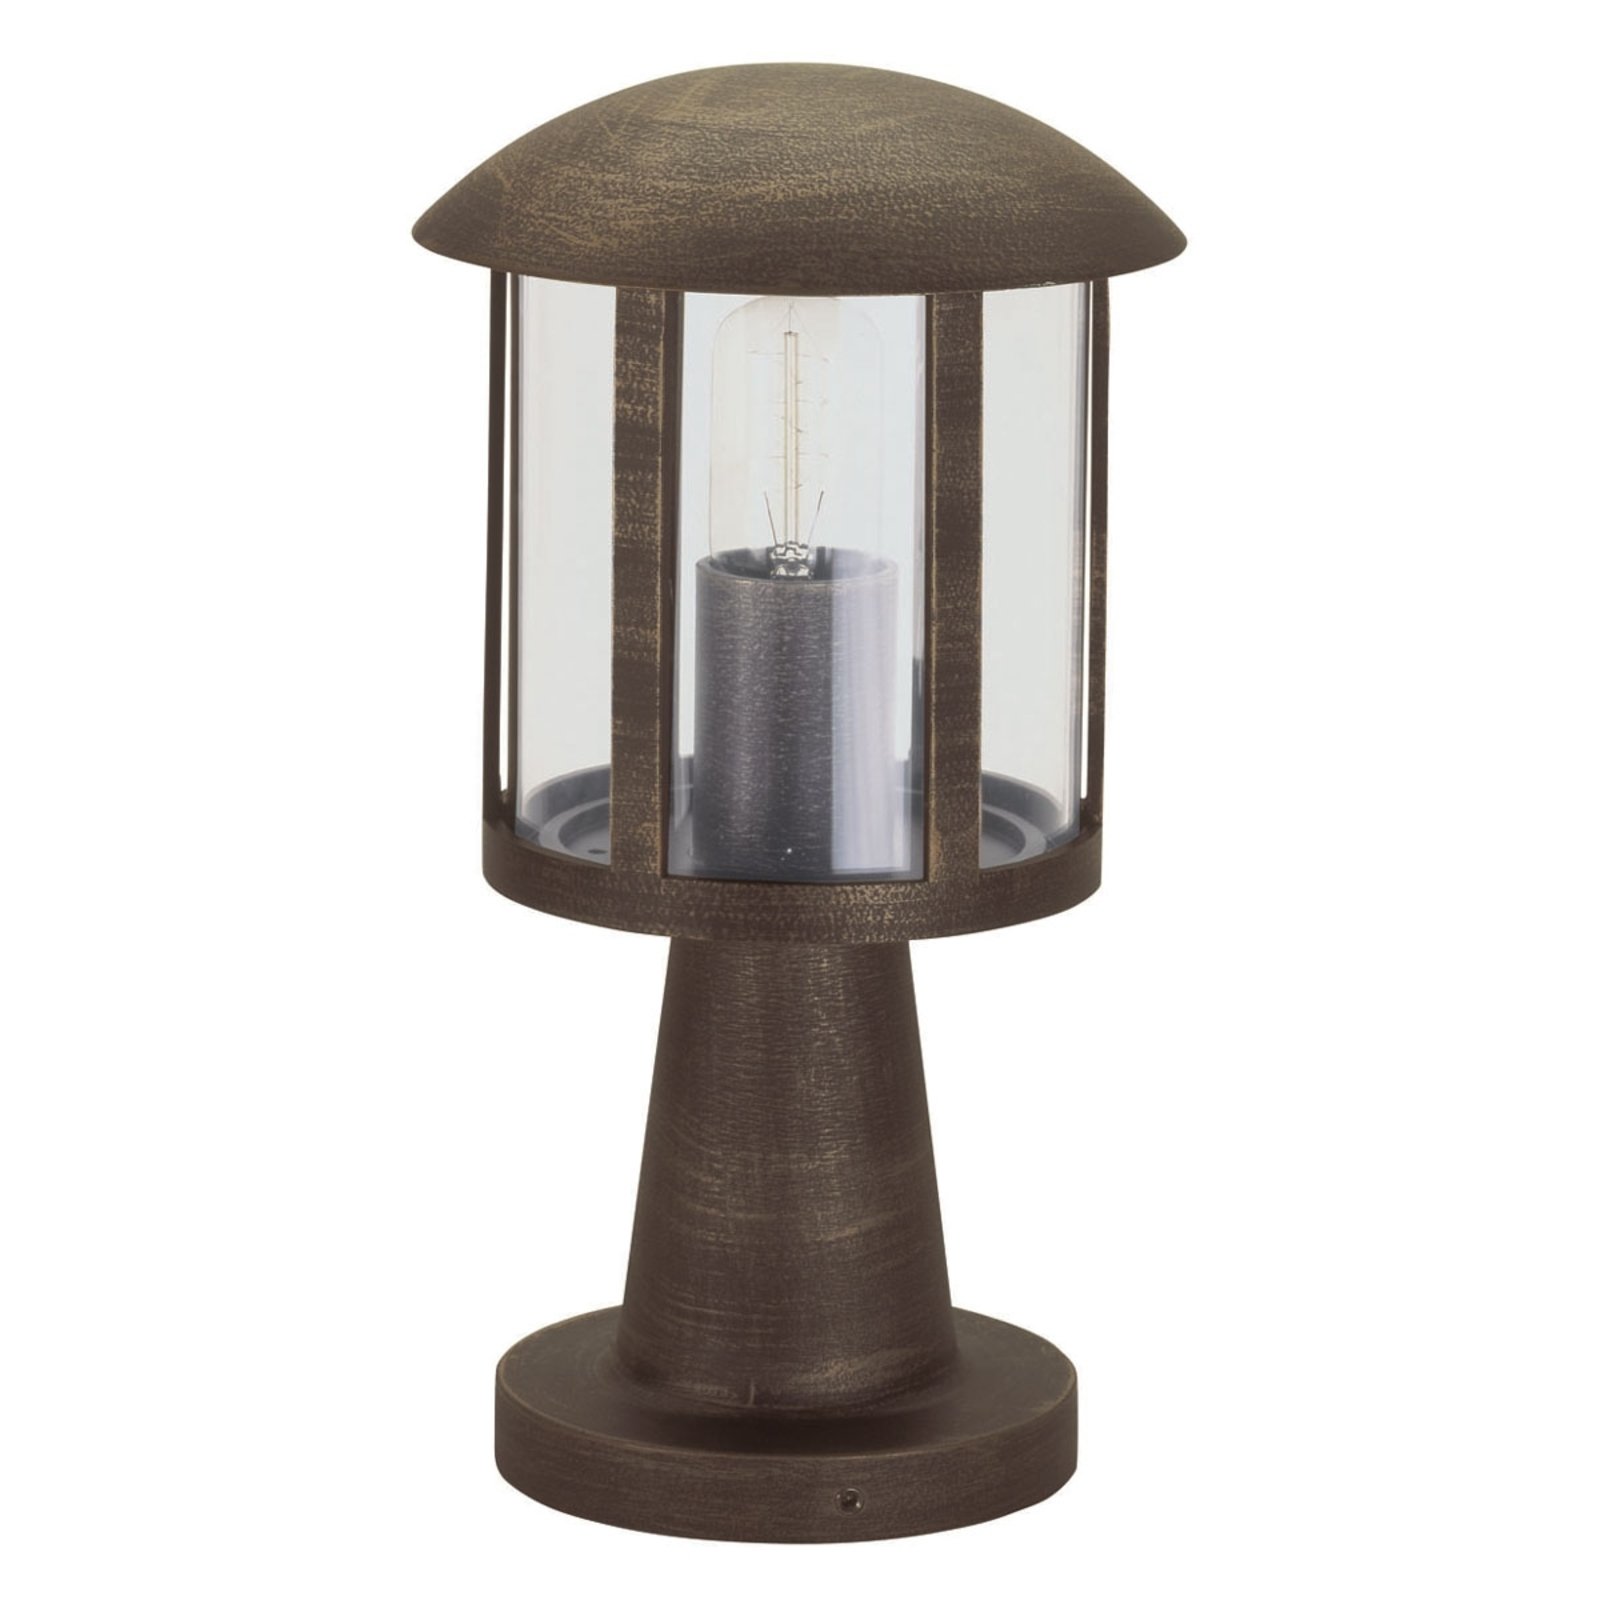 Mads pillar light in country house style, brown